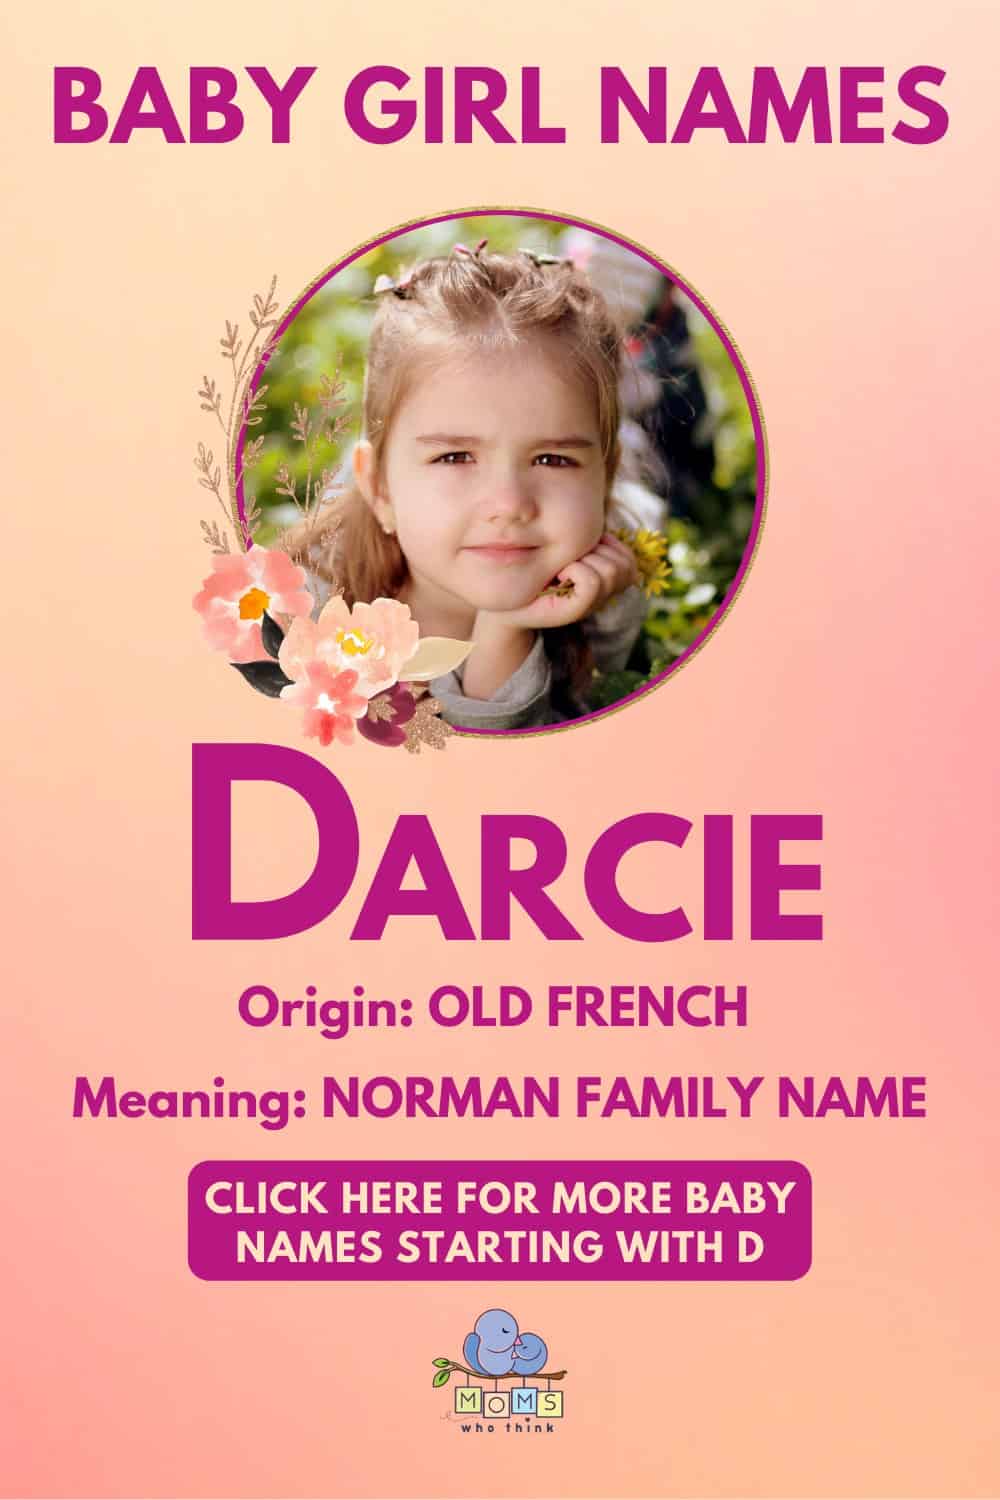 Baby girl name meanings - Darcie